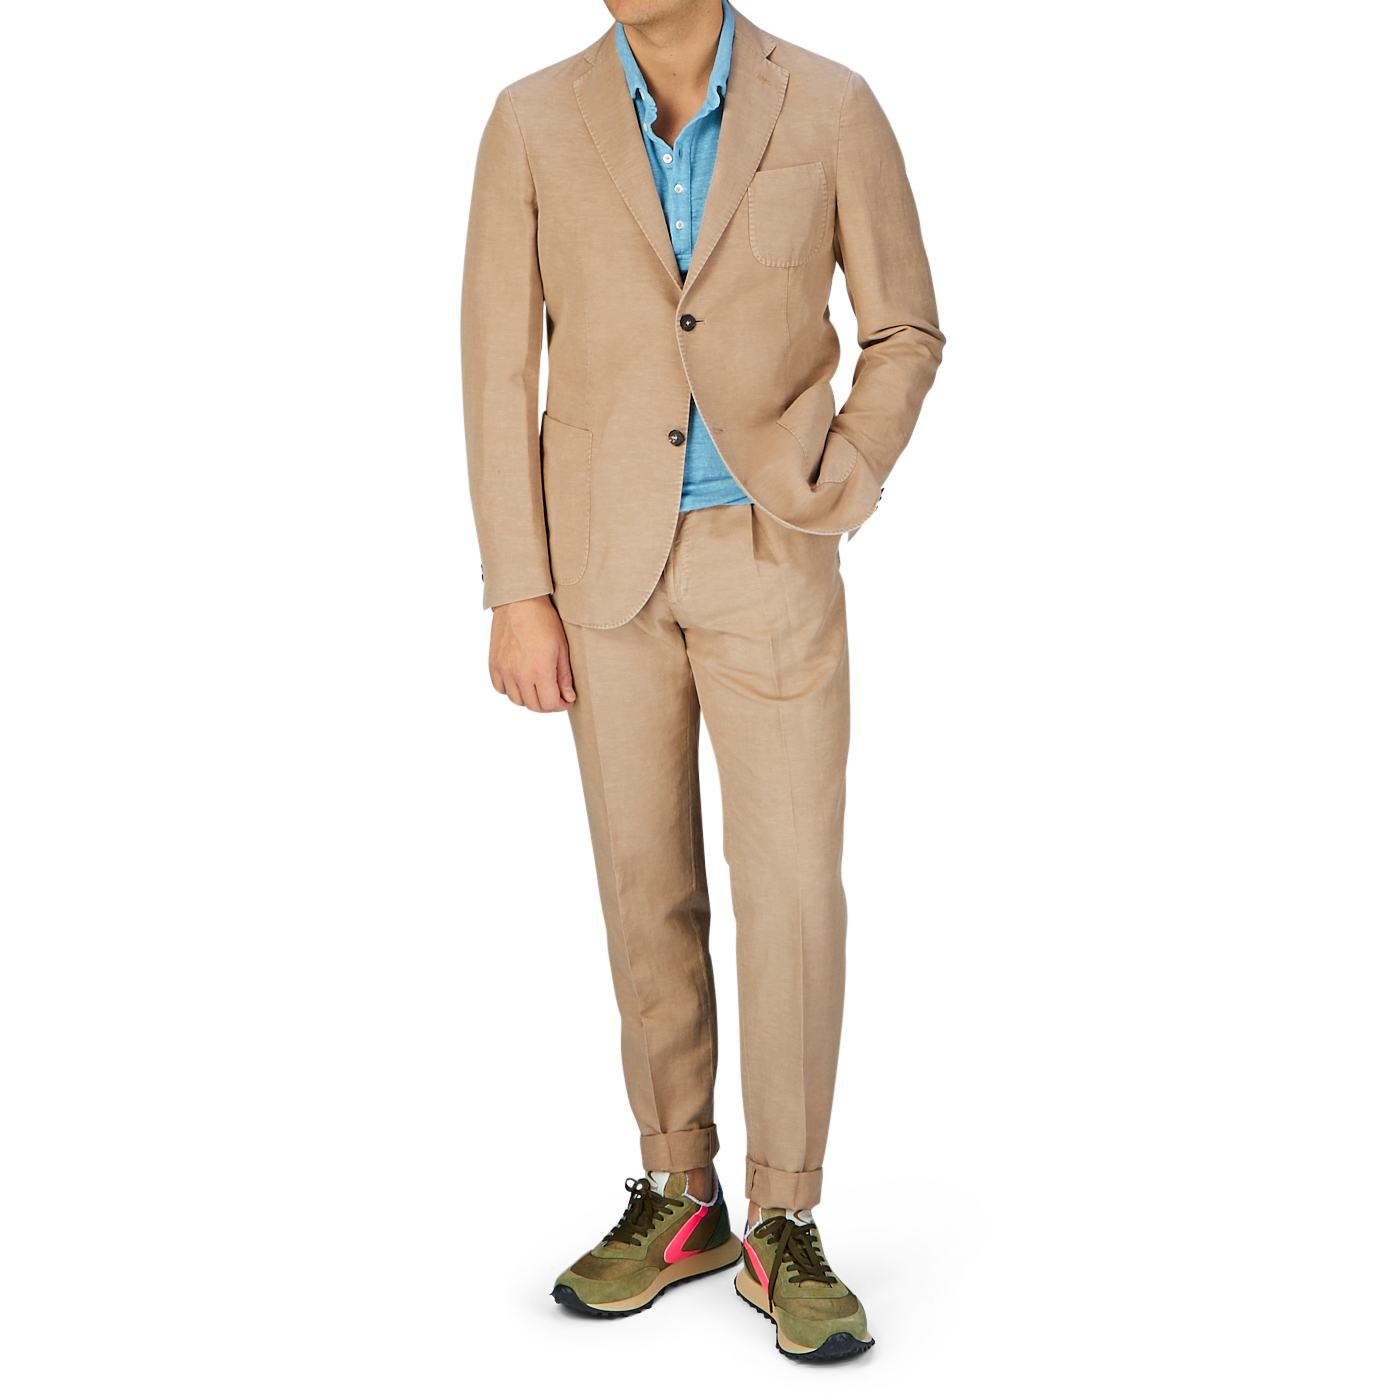 A man wearing a Slowear Light Beige Washed Chinolino Suit with medium-rise trousers, a blue shirt, and colorful sneakers.